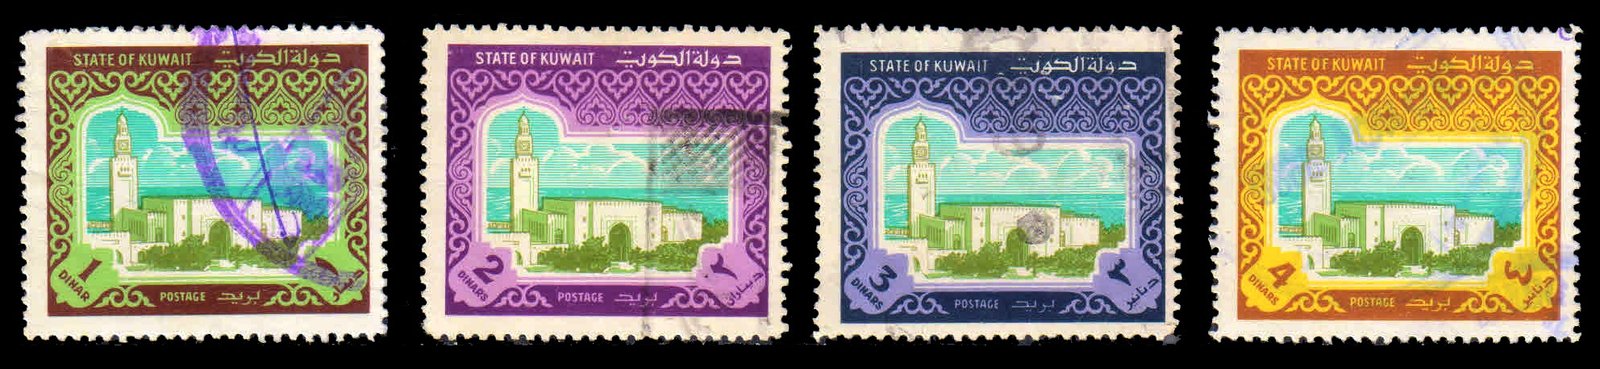 KUWAIT 1981 - Sief Palace, Set of 4 Stamps, Used, S.G. 911-914, Cat � 63